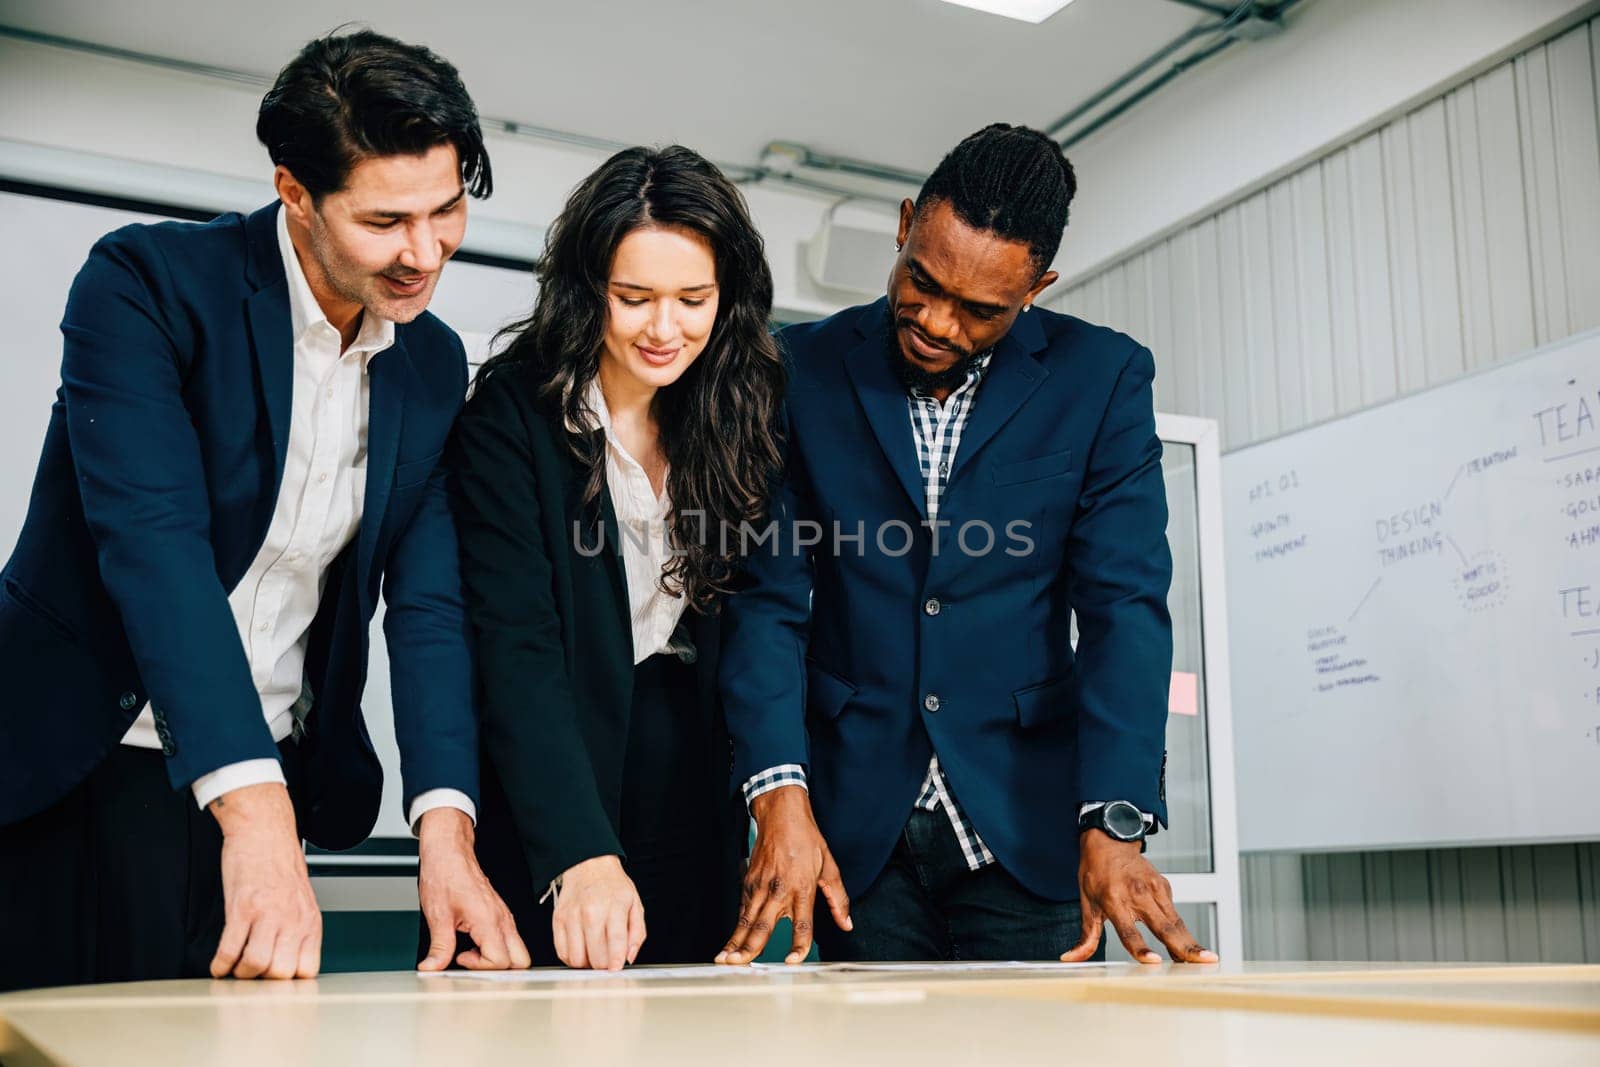 Colleagues at a conference room desk stand, actively planning for business success. Teamwork, diversity, and leadership define this successful meeting.